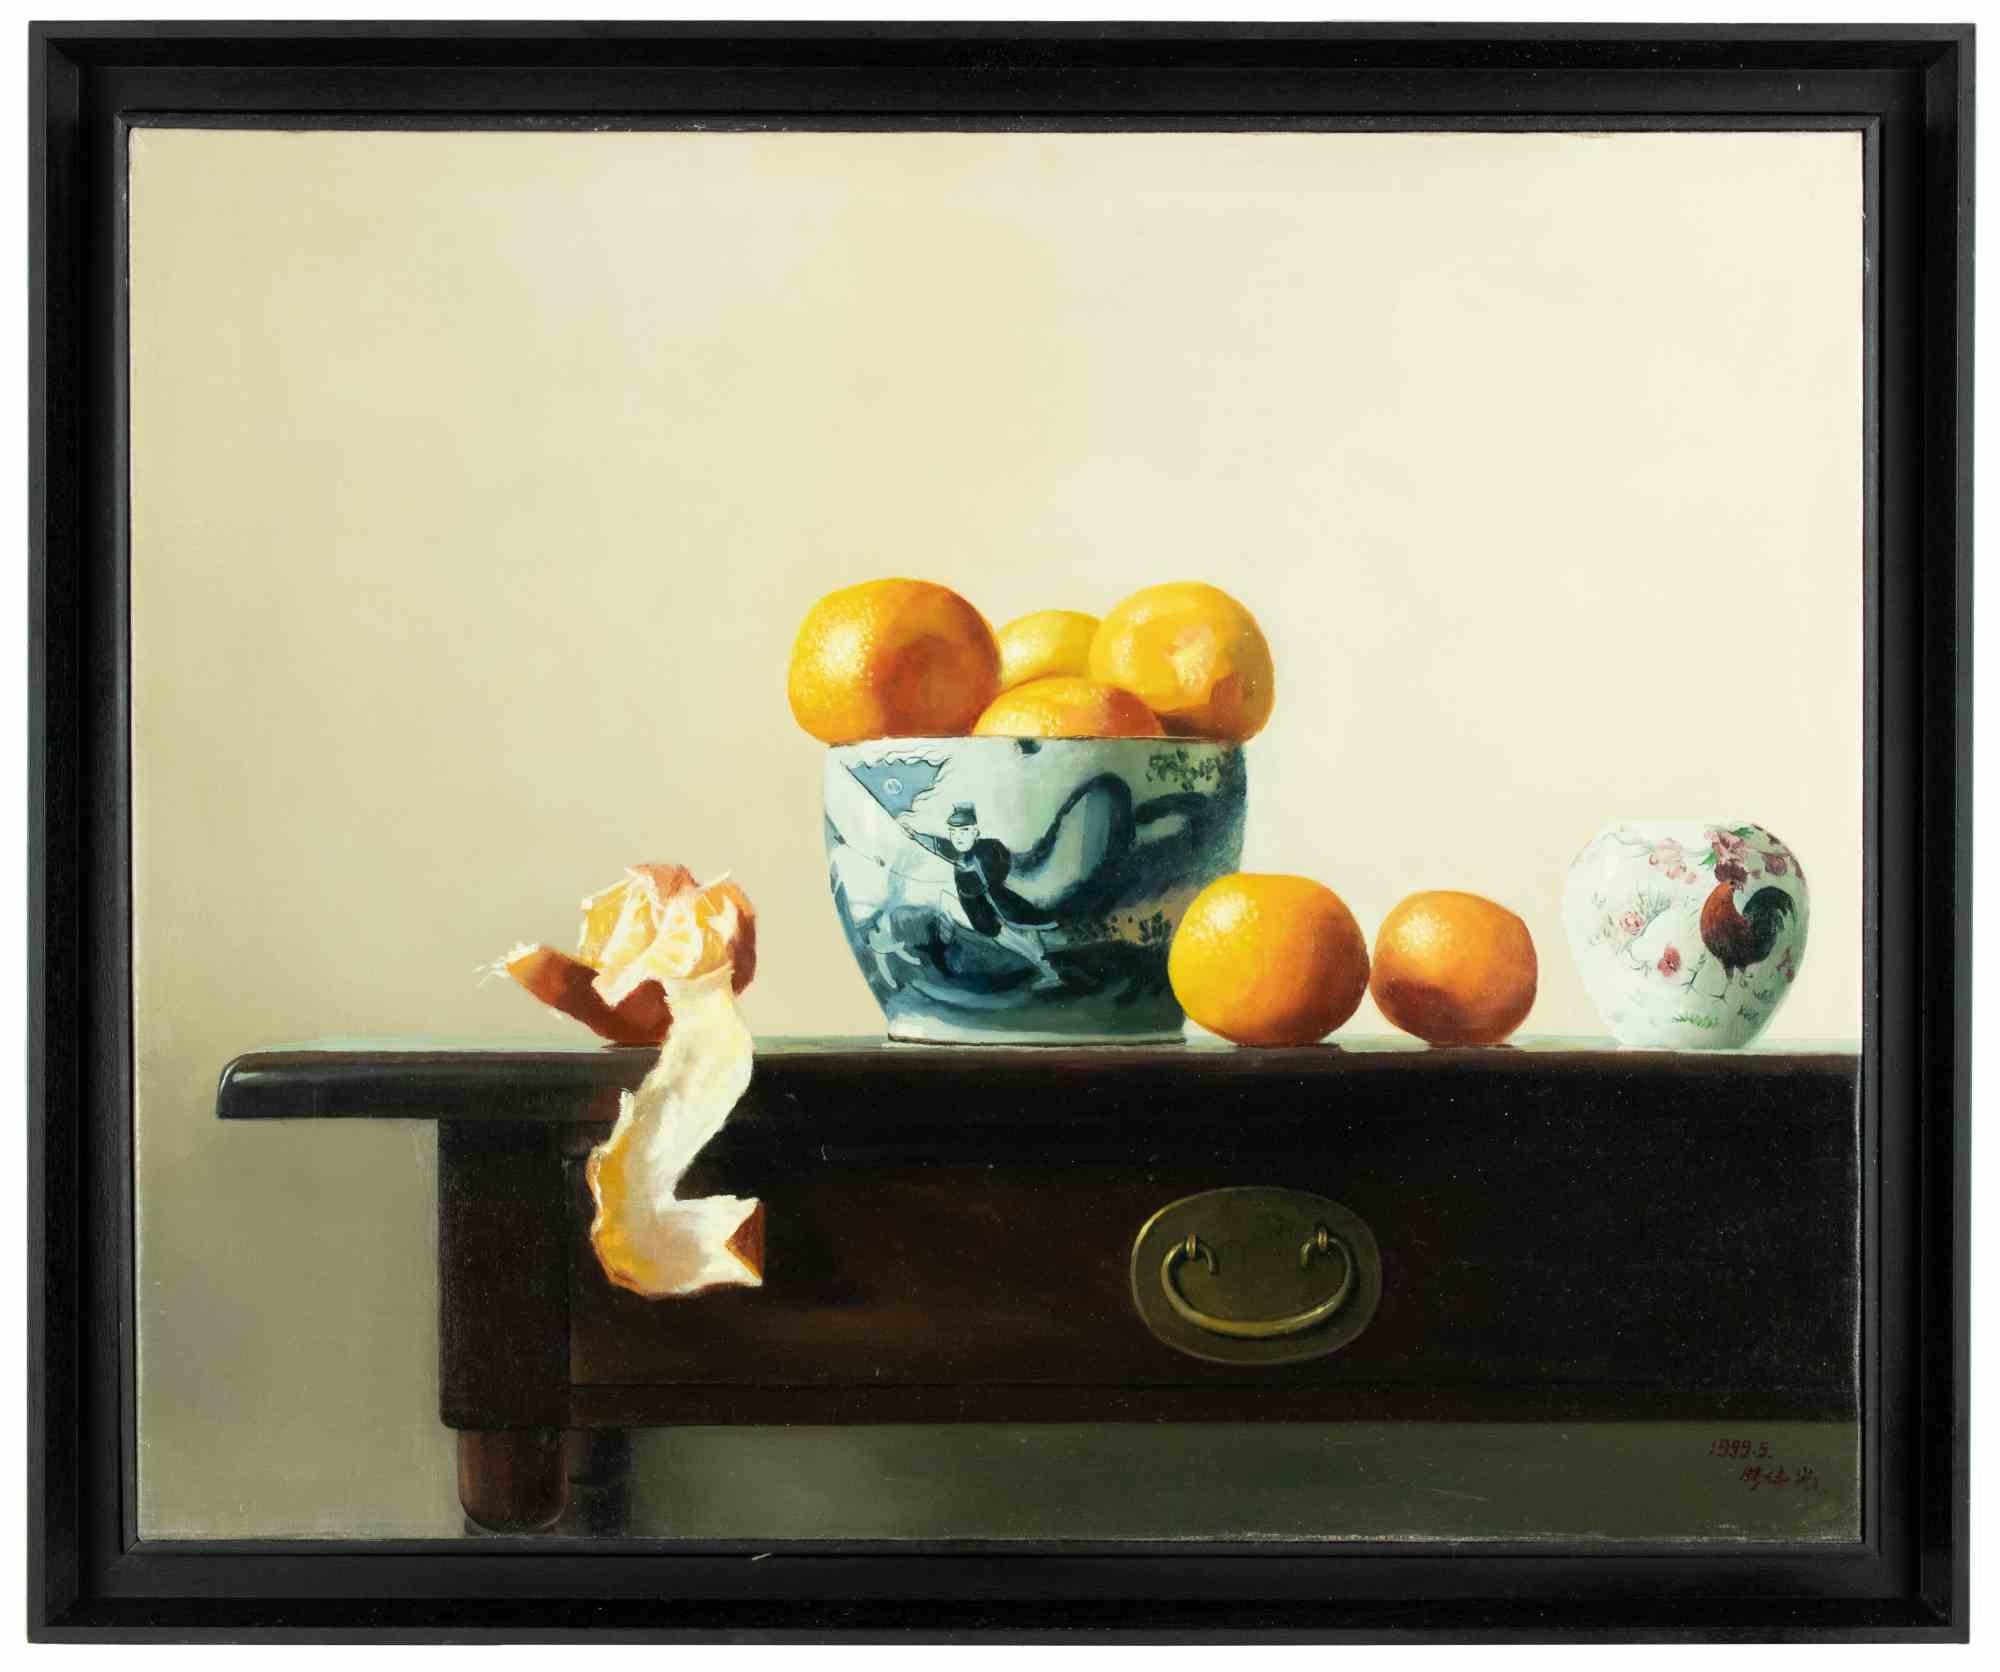 Oranges on Table is an original oil painting realized in 1999 by Zhang Wei Guang (Mirror).

Includes frame

Mixed colored oil painting

Hand-signed and dated on the lower margin

Good conditions.

Zhang Wei Guang , also called ‘mirror' was born in